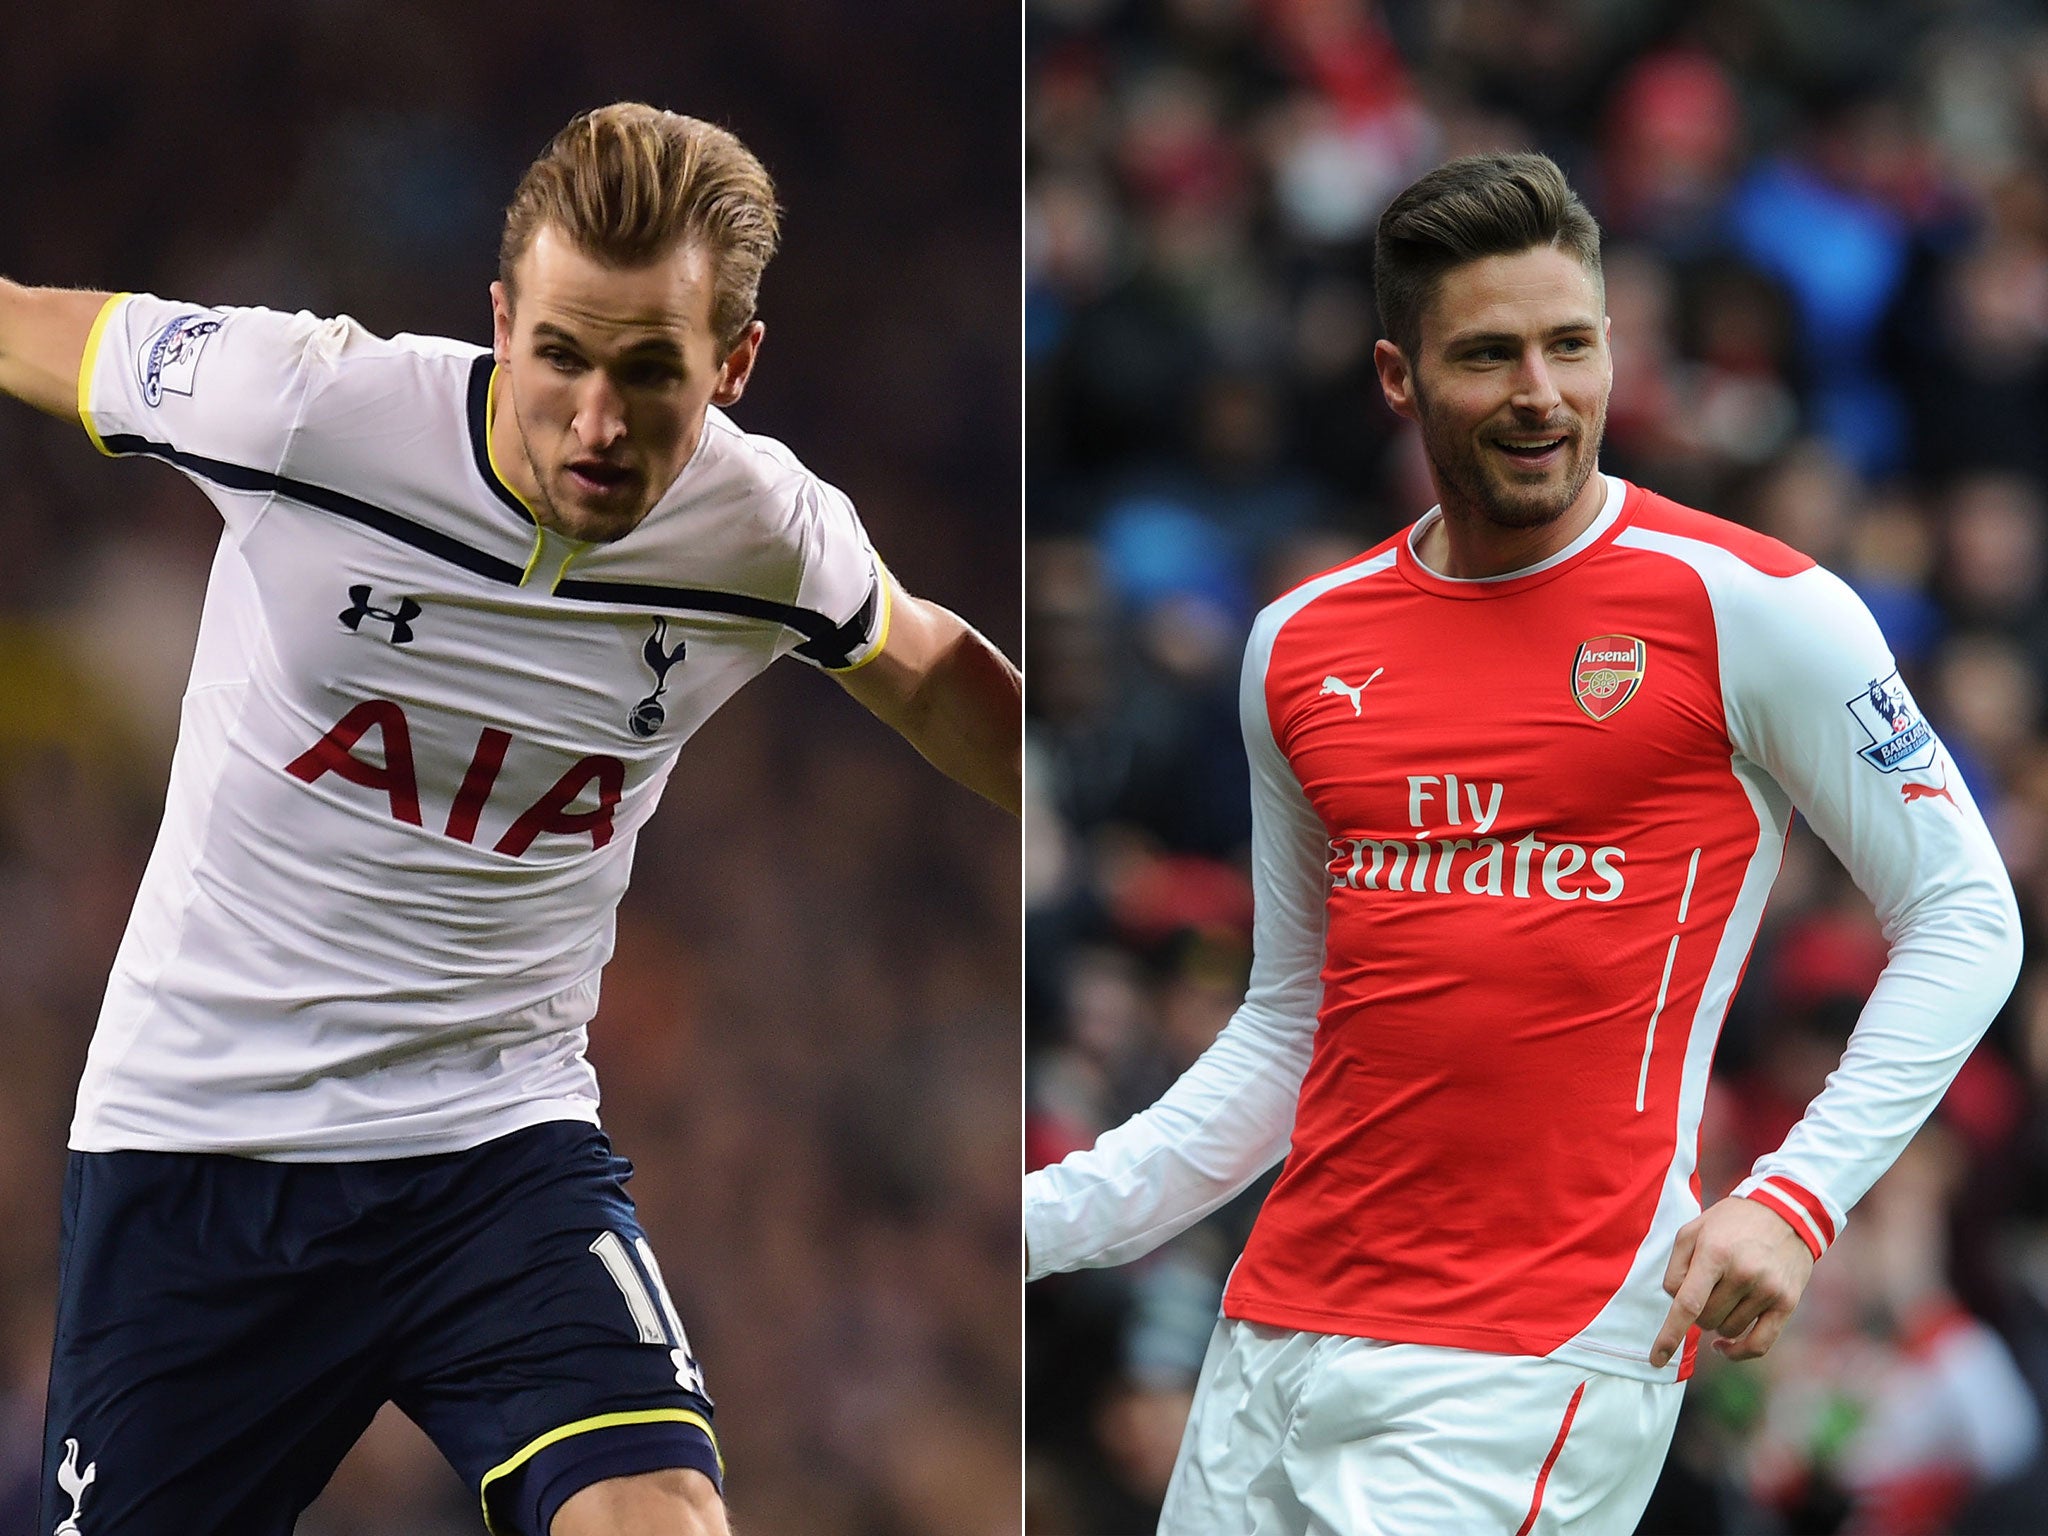 Tottenham's Harry Kane (left) and Arsenal's Olivier Giroud have been in fine form for their clubs